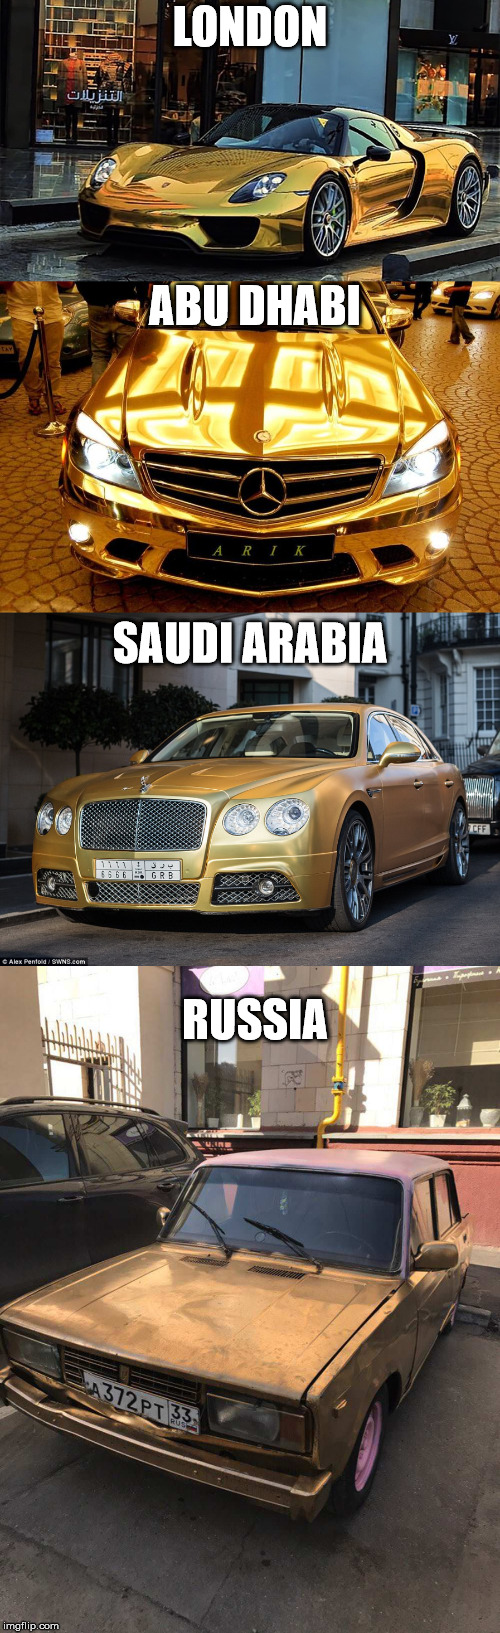 From the "All That Glitters Is Not Gold" file... | LONDON; ABU DHABI; SAUDI ARABIA; RUSSIA | image tagged in cars,gold exteriors,countries | made w/ Imgflip meme maker